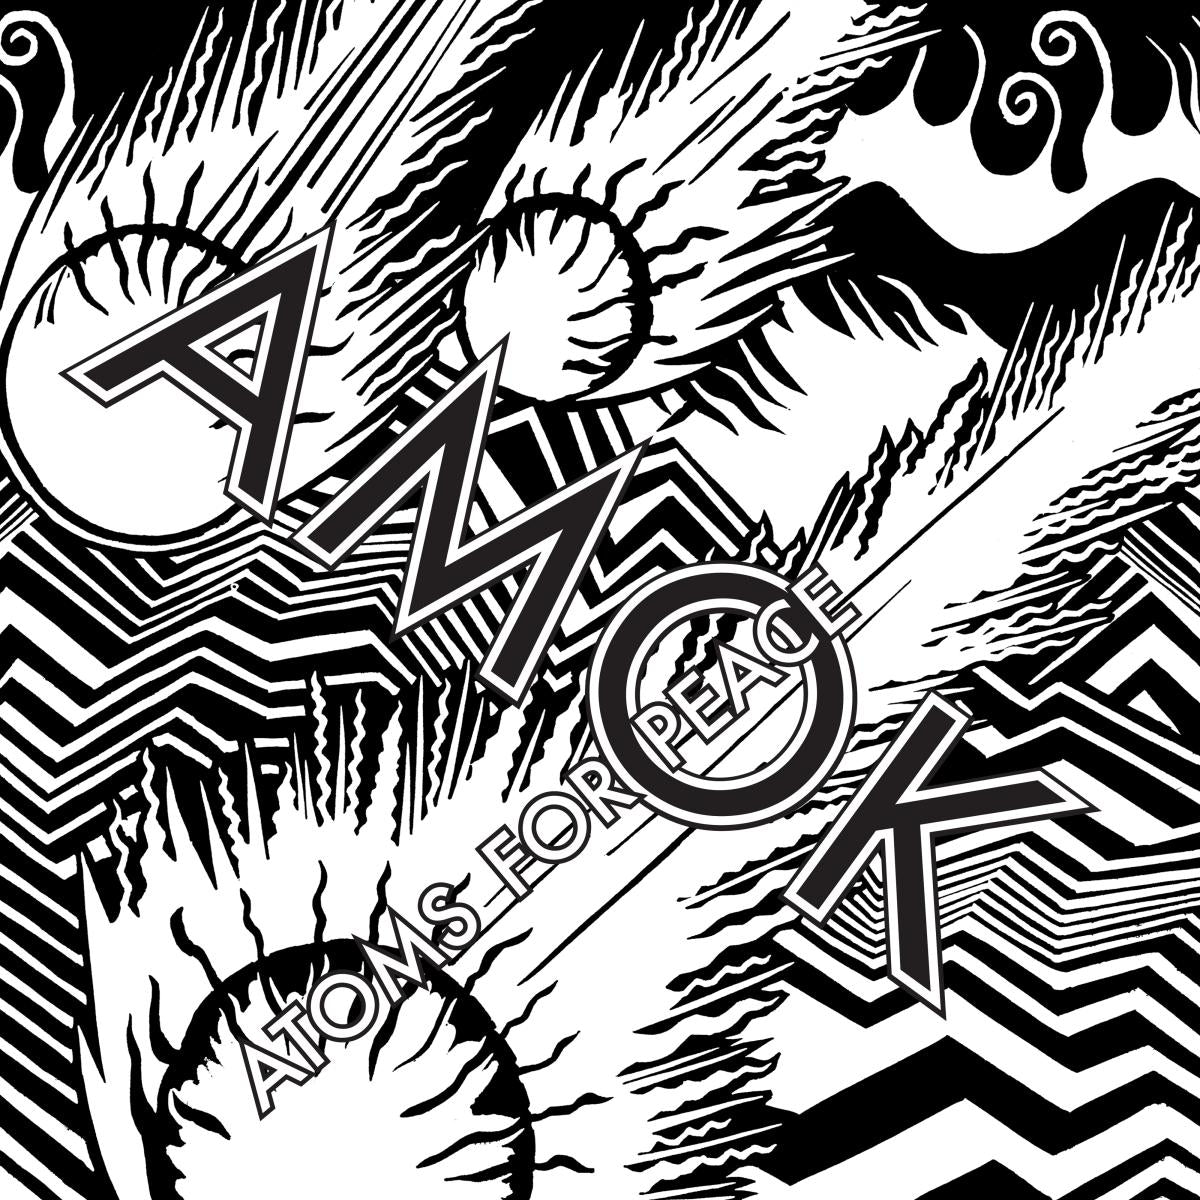 Atoms for Peace - AMOK (MP3 Download)